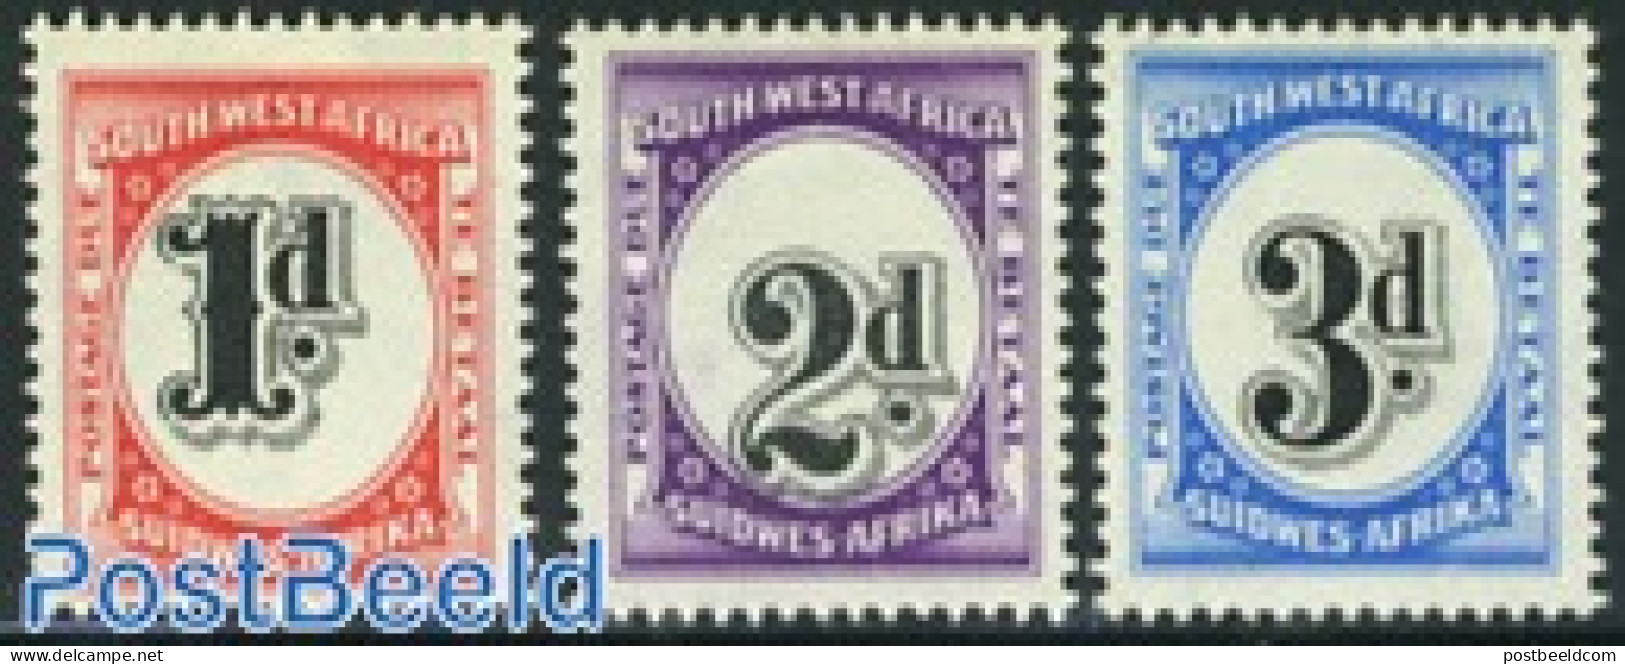 South-West Africa 1959 Postage Due 3v, Mint NH - South West Africa (1923-1990)